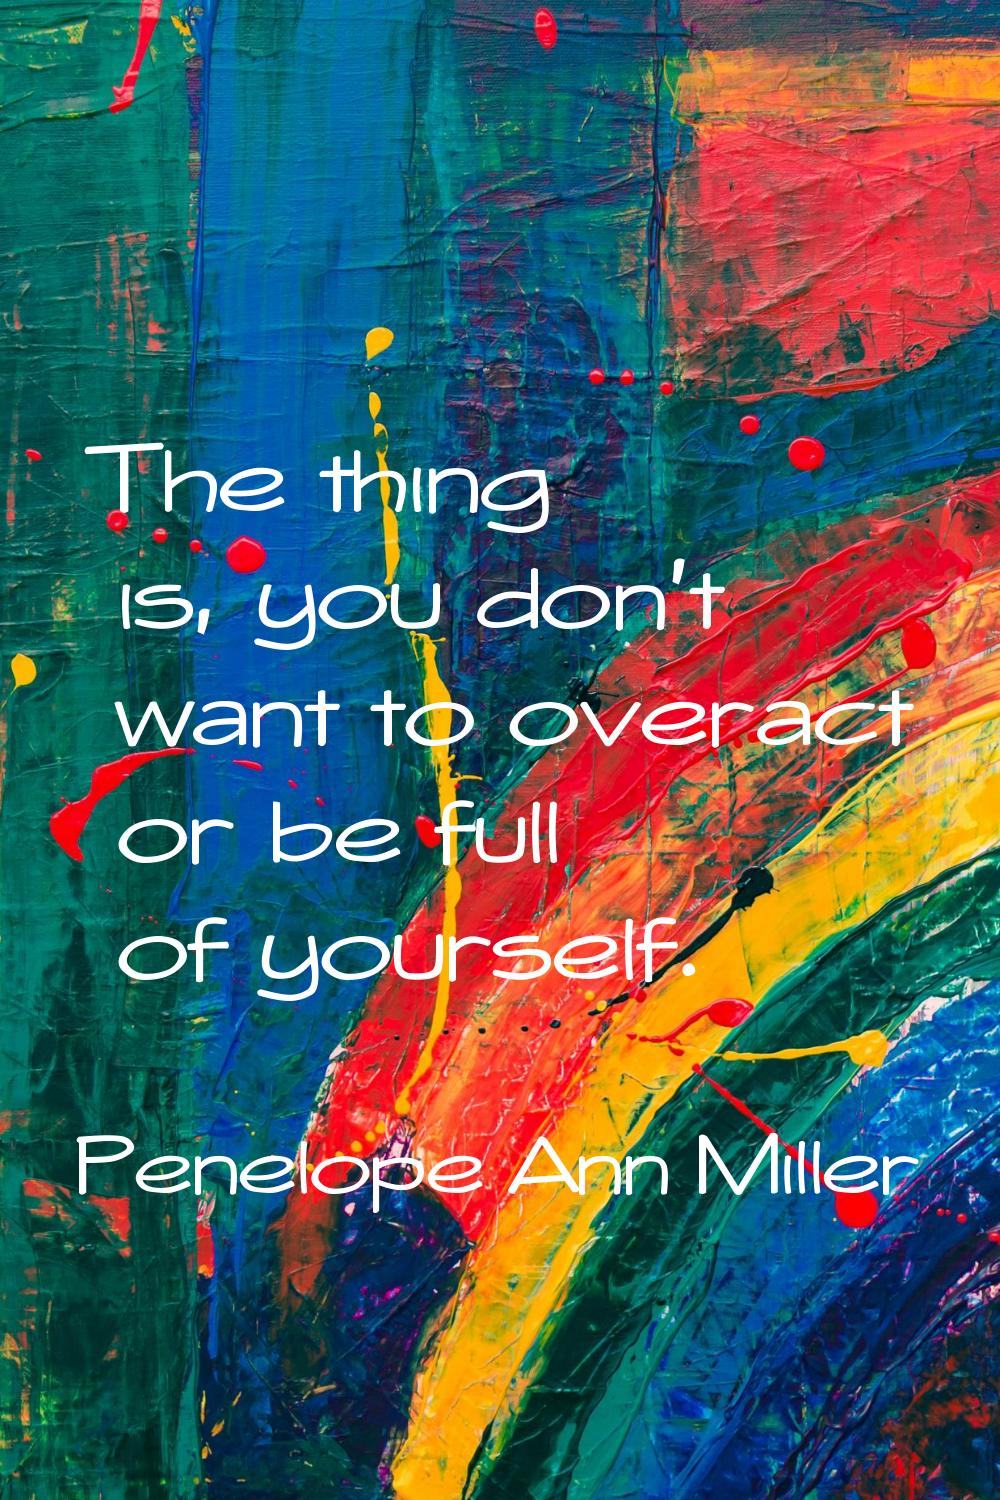 The thing is, you don't want to overact or be full of yourself.